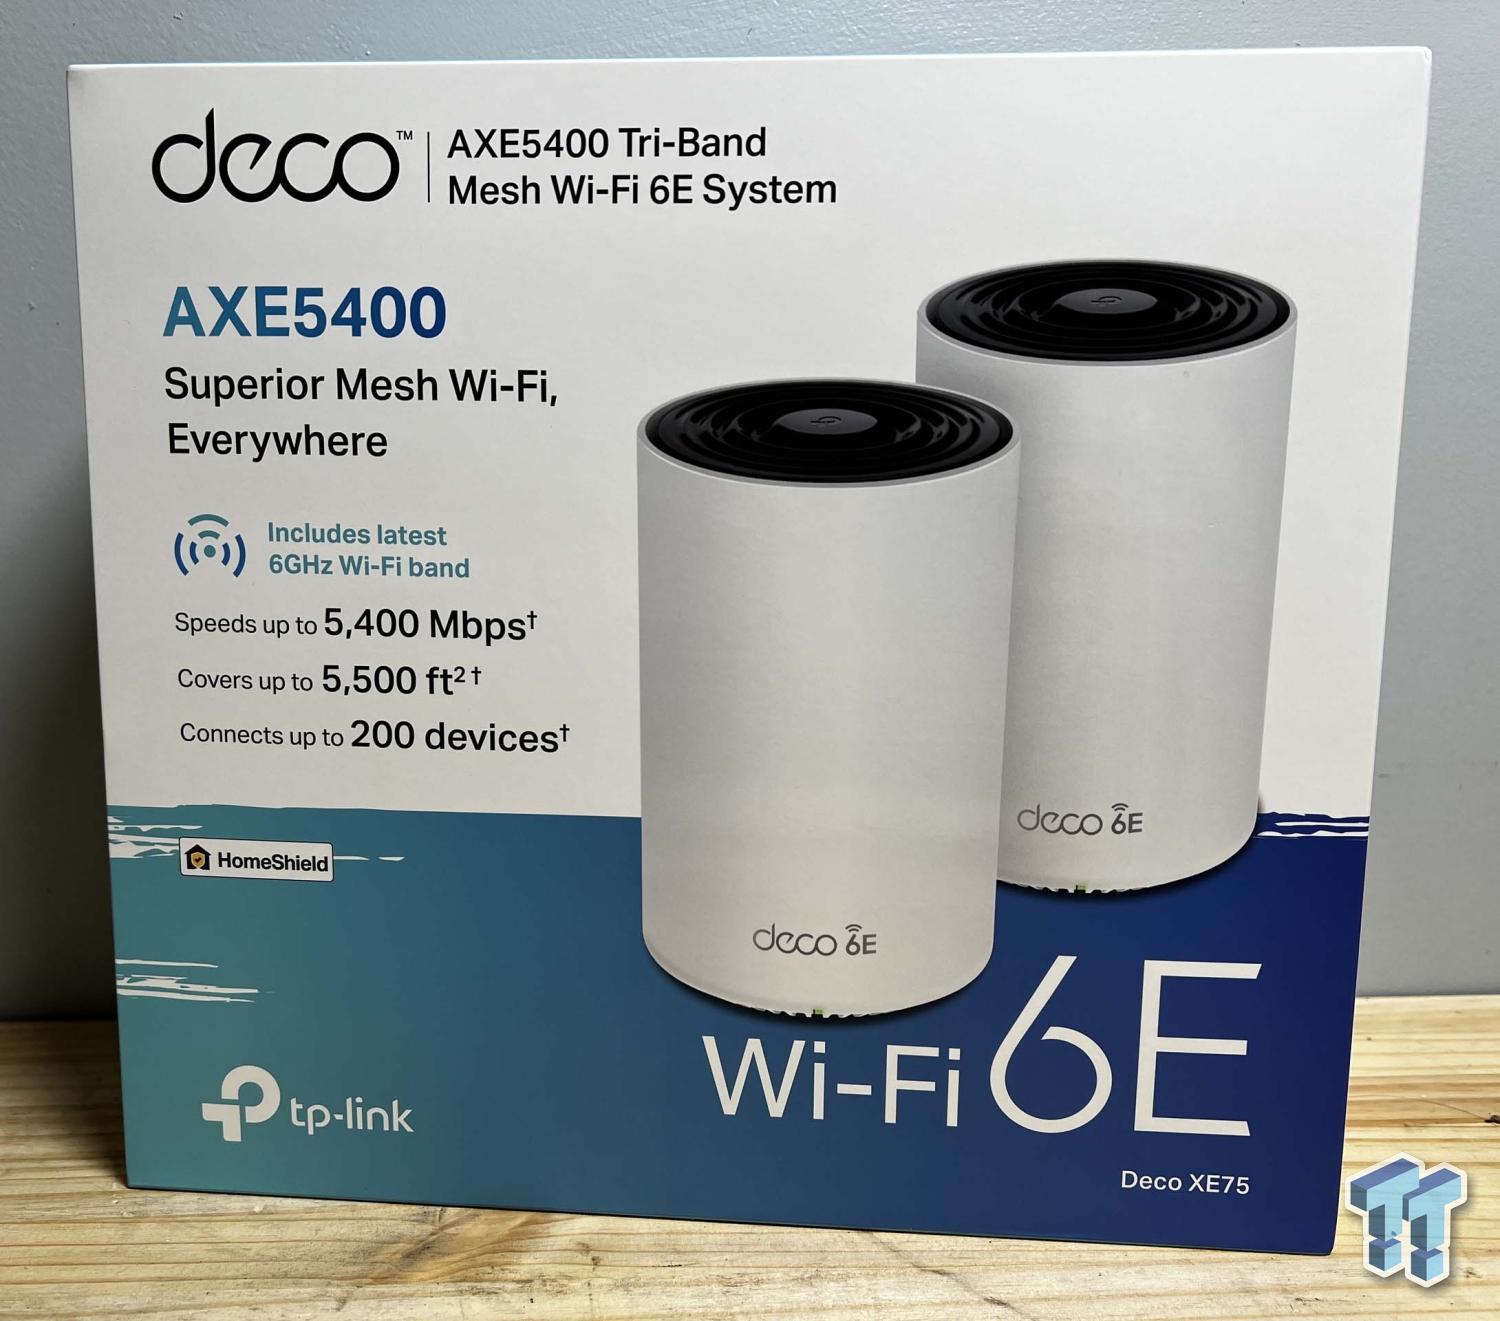 TP-Link Deco XE75 AXE5400 WHOLE HOME TRI-BAND MESH WI-FI 6E SYSTEM (3 Pack)